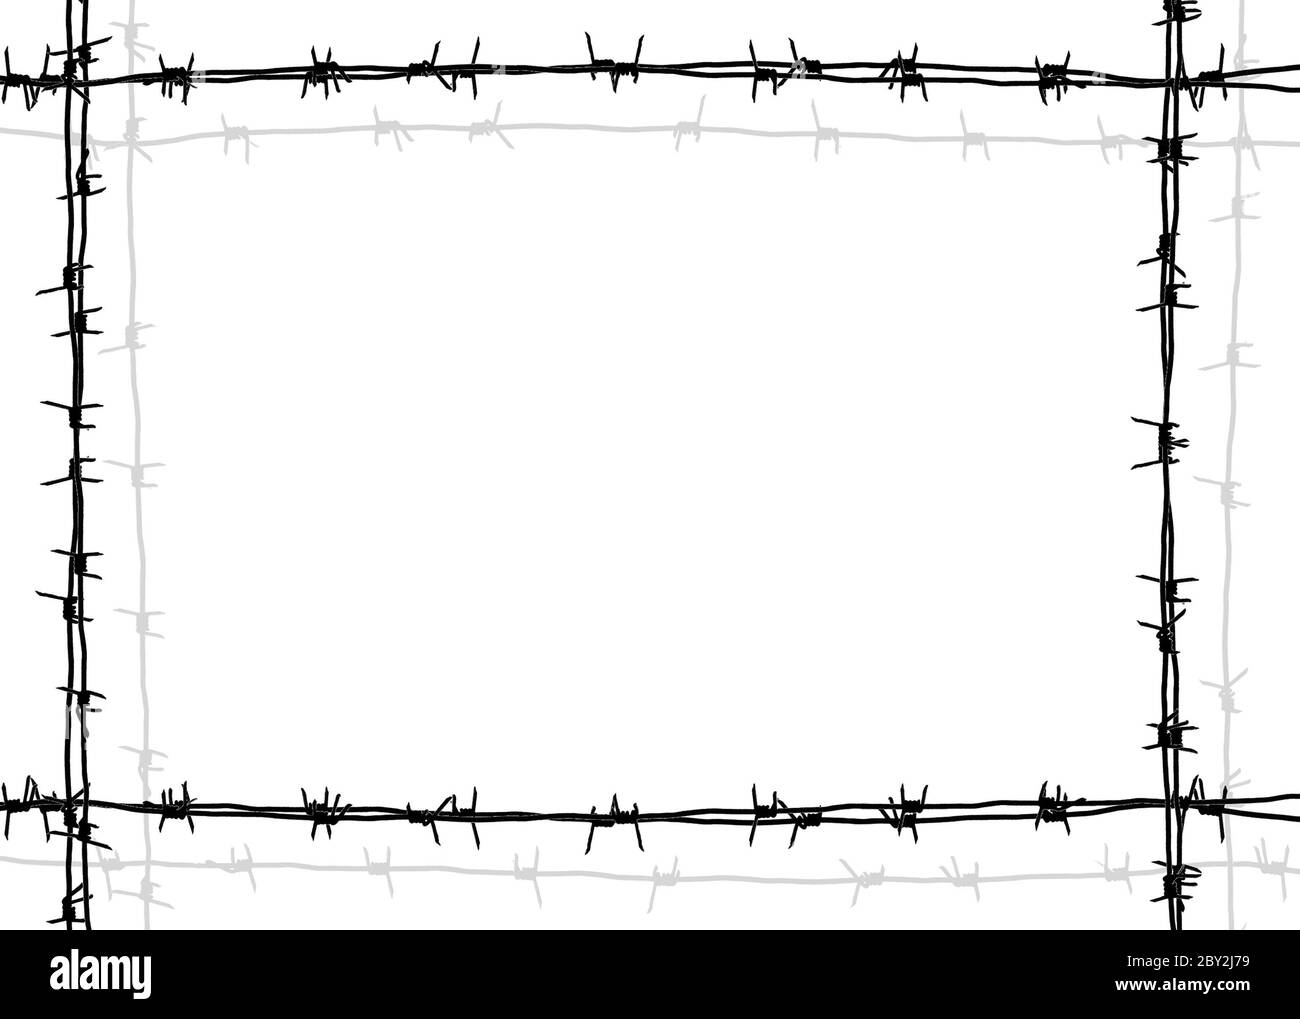 barbed wire frame Stock Photo